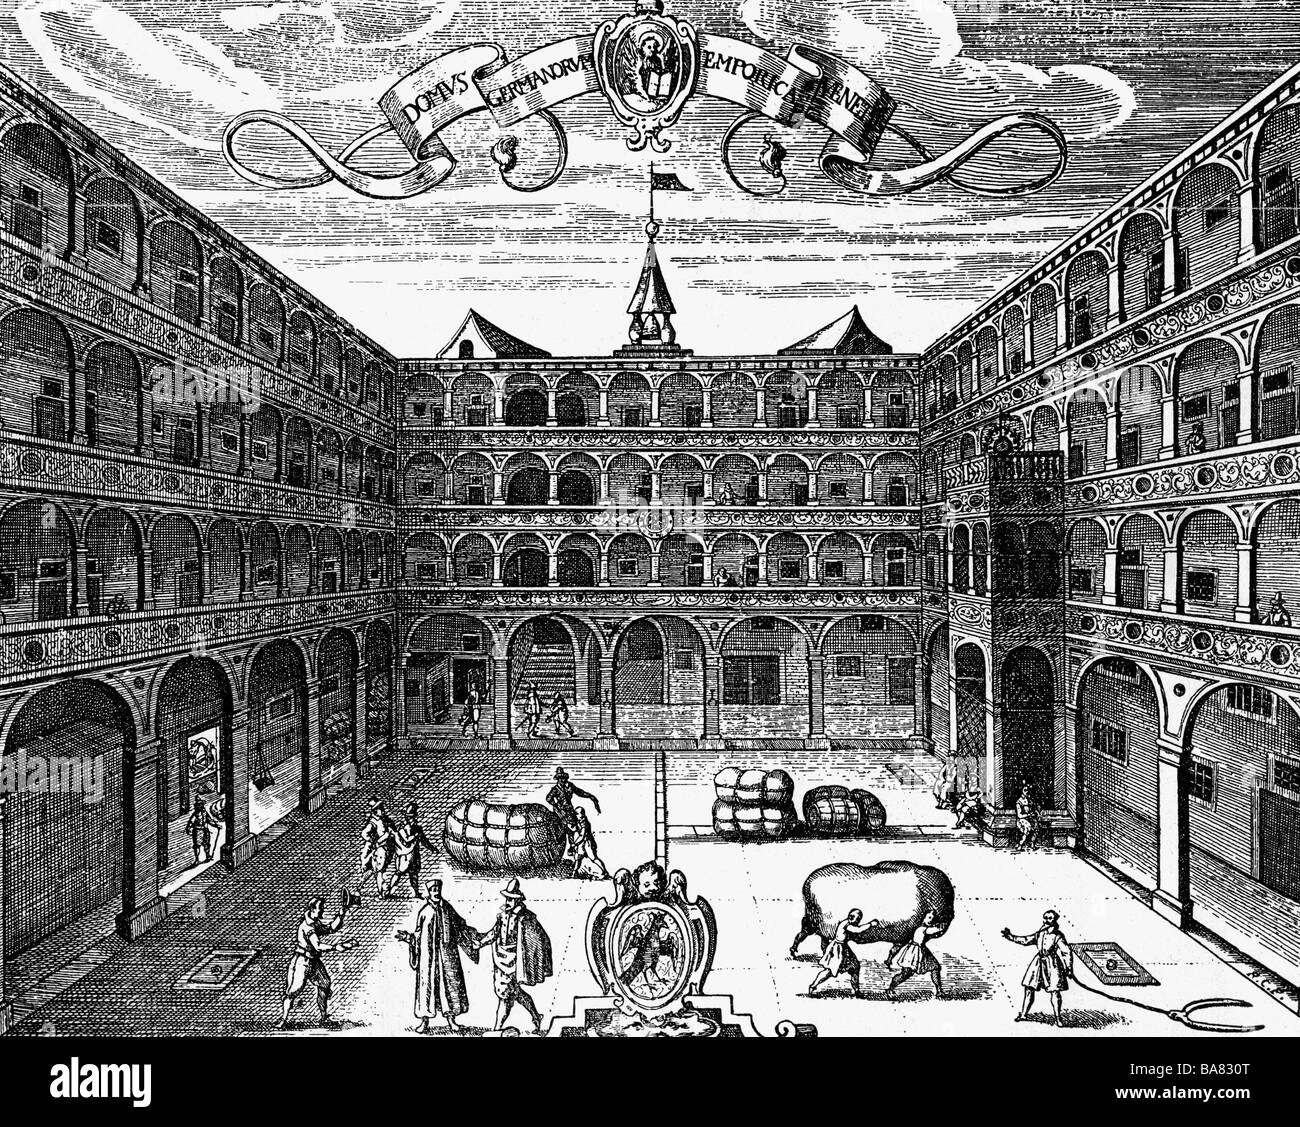 geography / travel, Italy, Venice, Fondaco dei Tedeschi, inne court, copper engraving, 16th century, quarters of the German merchants, trade, Germany, historic, historical, people, Artist's Copyright has not to be cleared Stock Photo